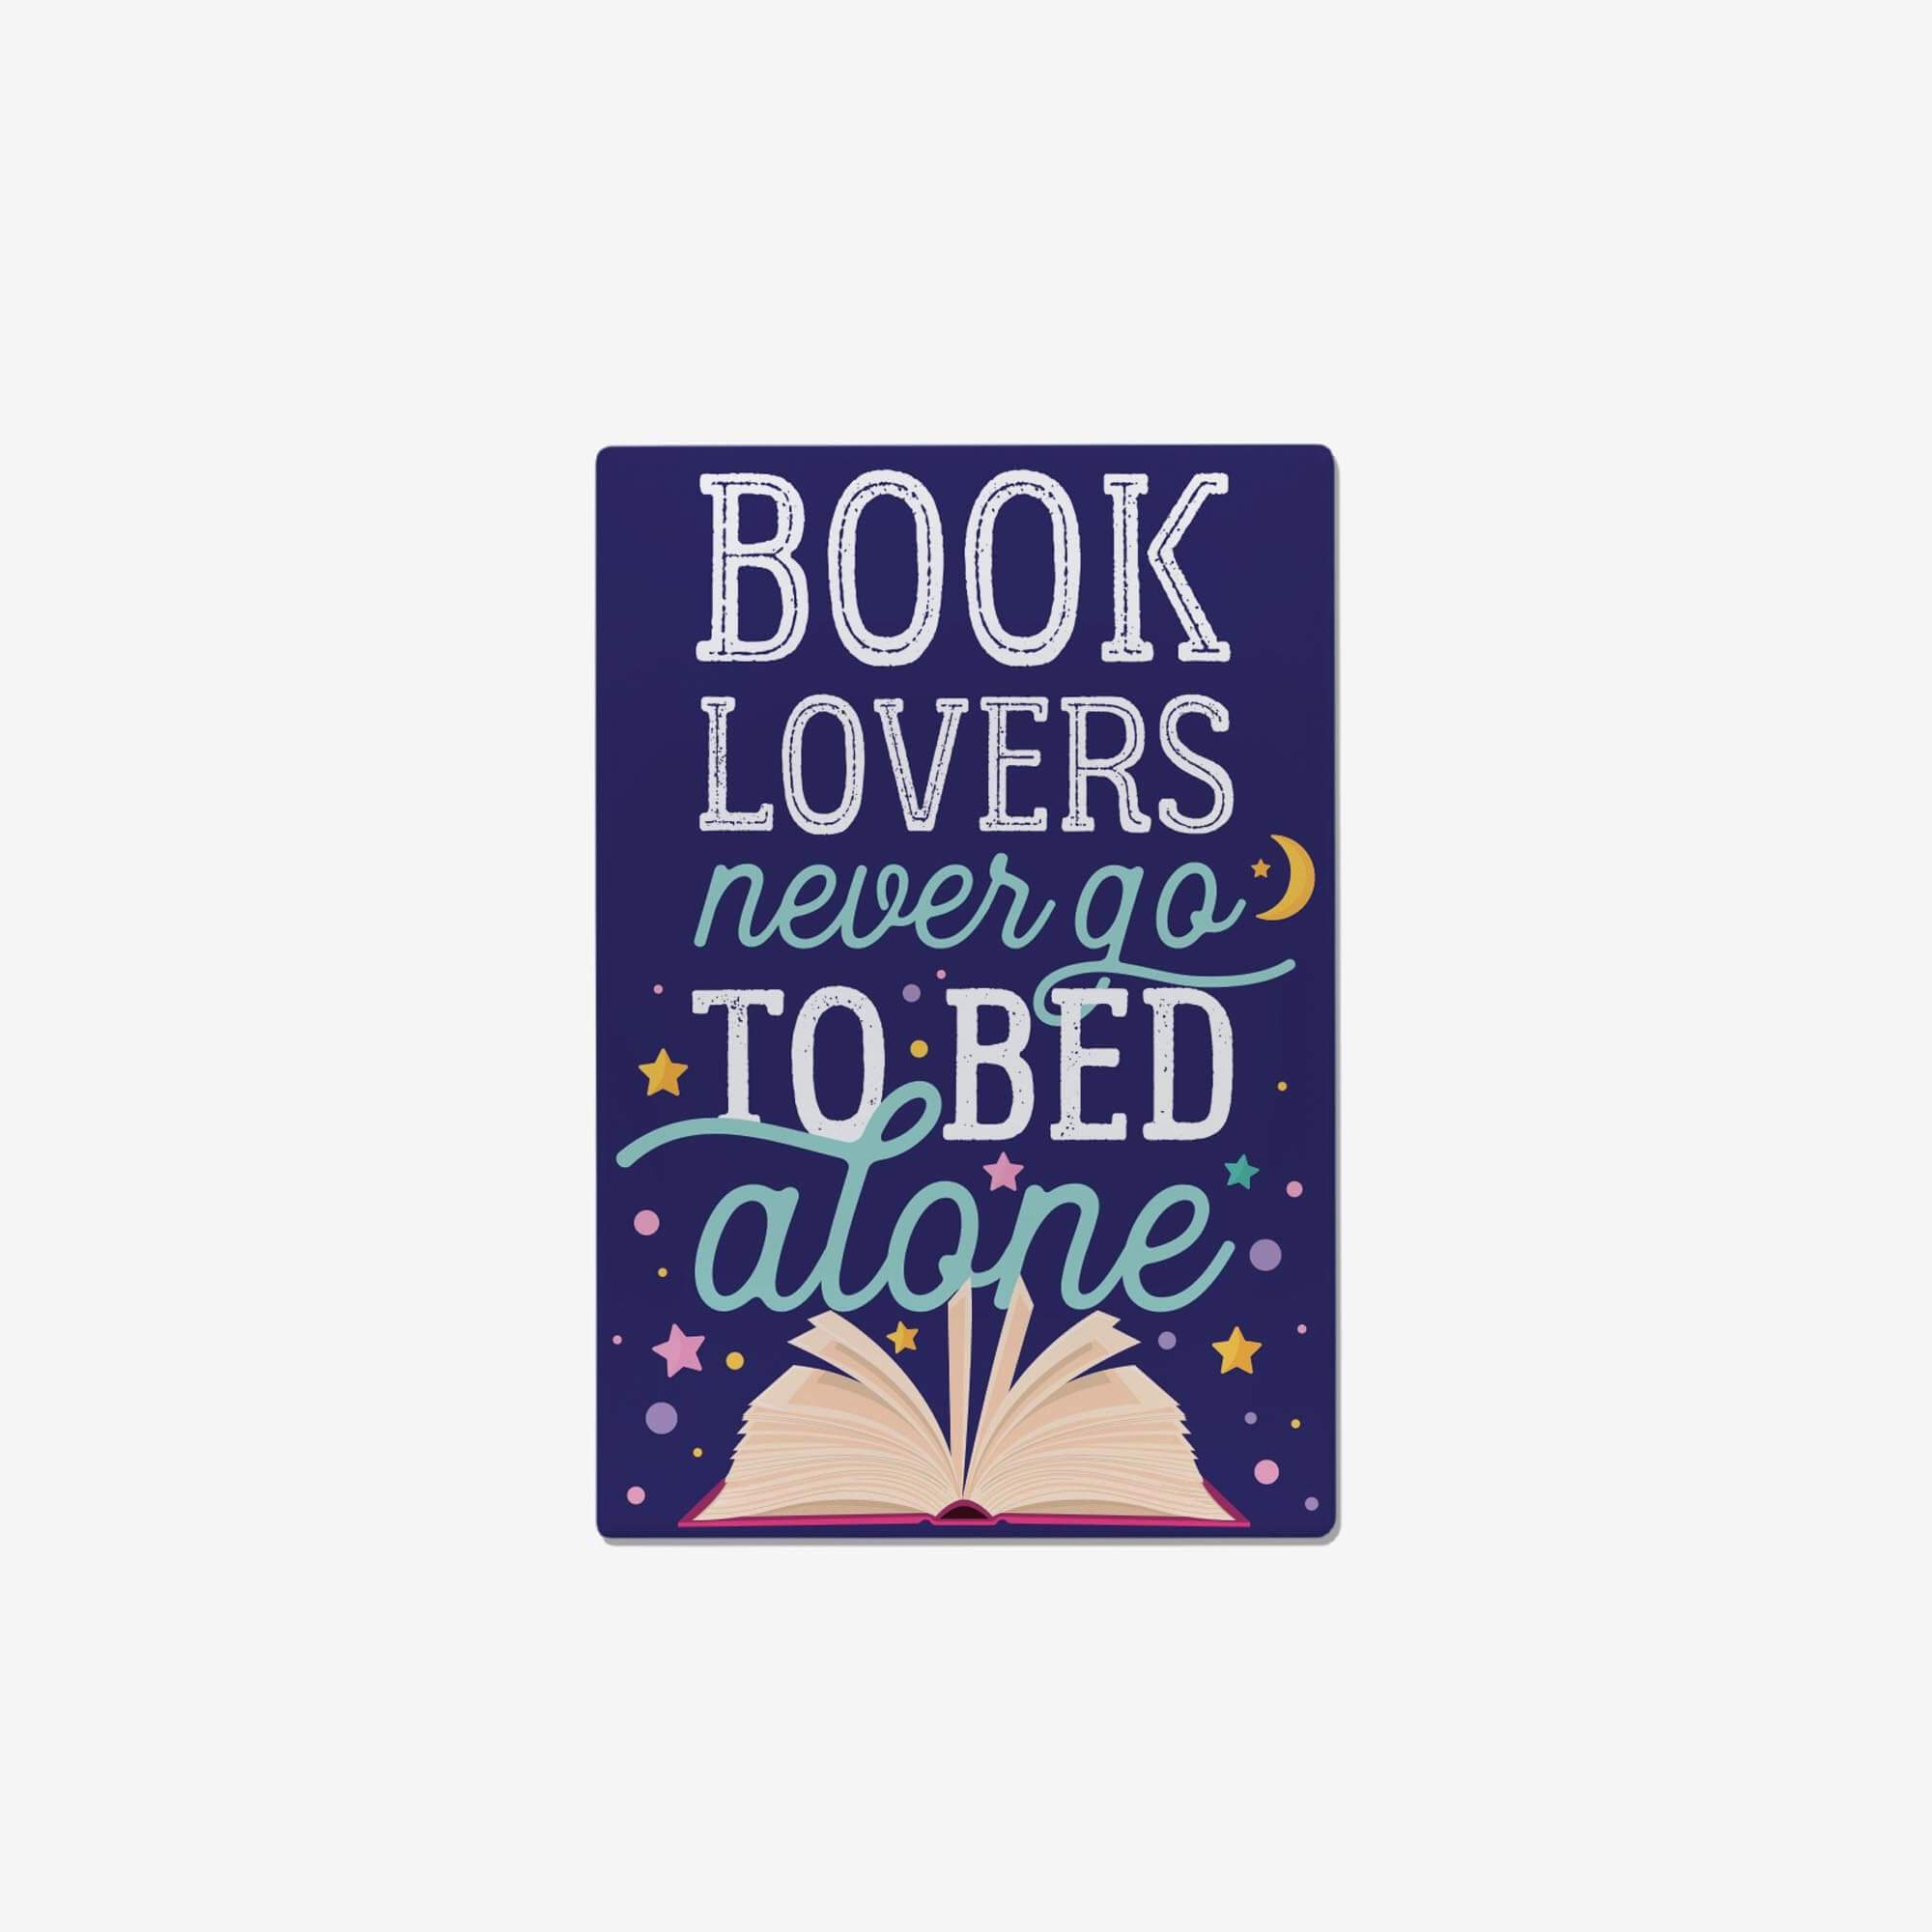 Booklovers never go to bed alone - Aimant 5,5 x 8 cm Legami 